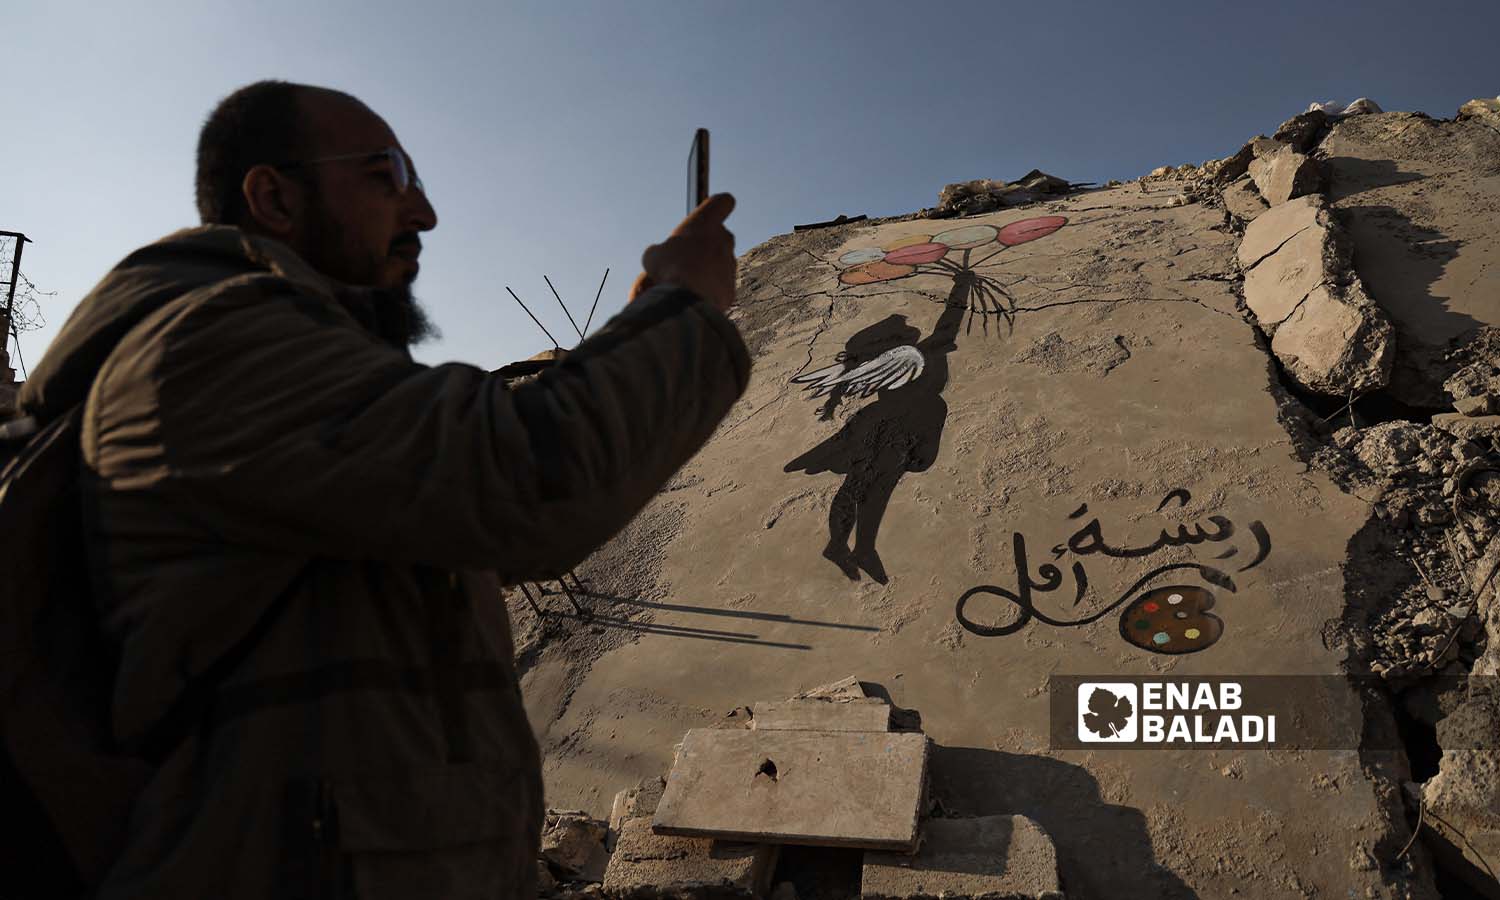 A man takes pictures of the graffiti painted on the rubble of buildings destroyed by the earthquake that hit Jindires town in Aleppo countryside - February 24, 2023 (Enab Baladi/Amir Kharboutli)
